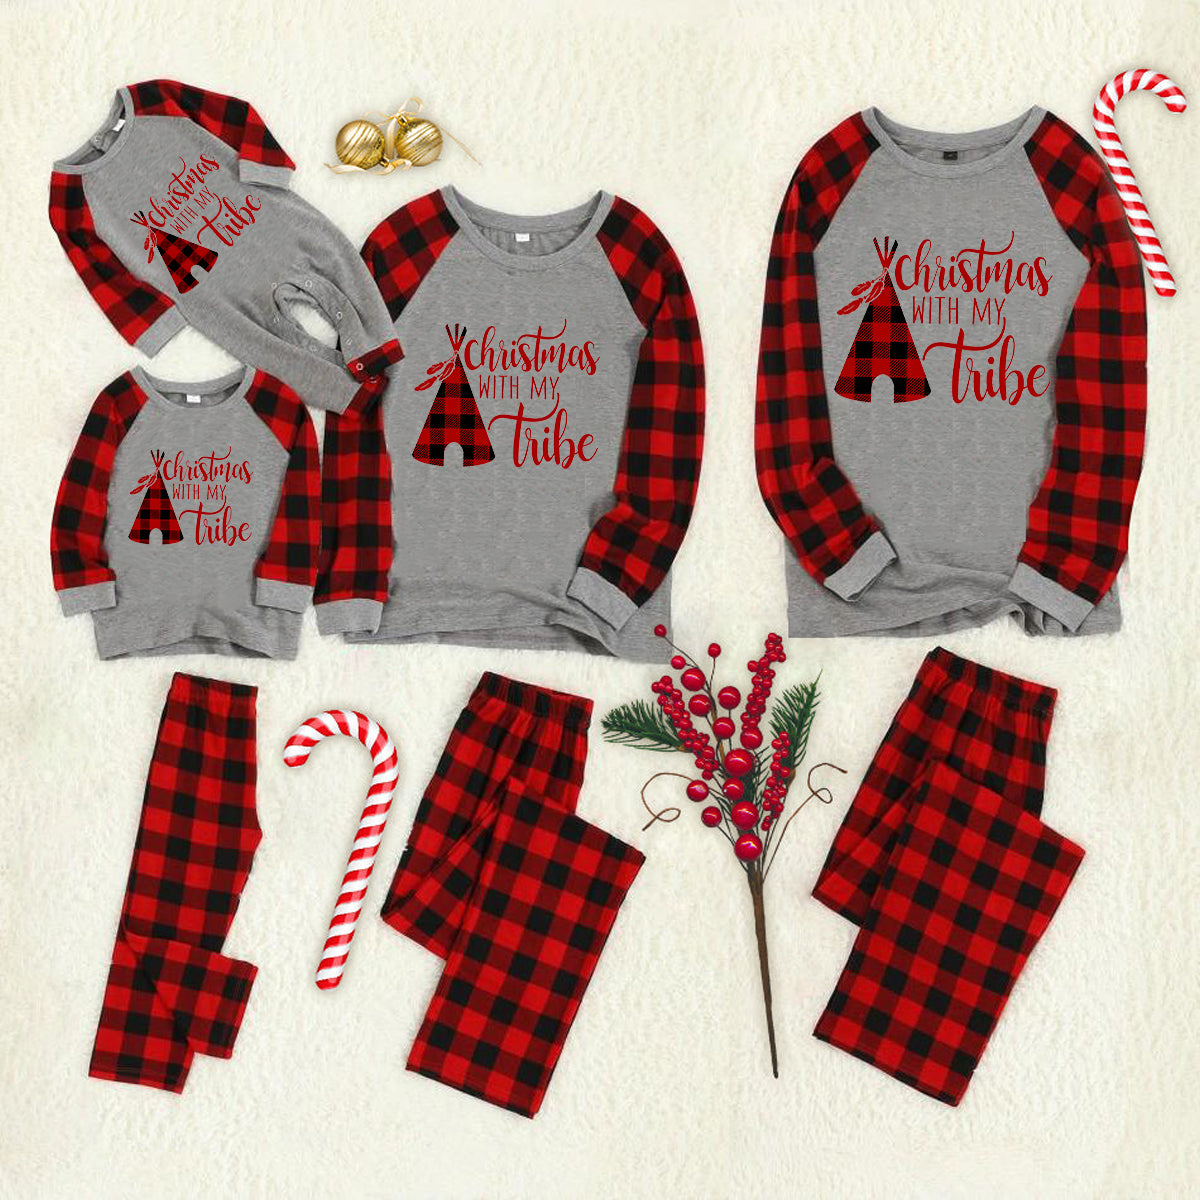 Family Christmas Shirts Christmas Tree Buffalo Plaid Patterned and 'Christmas WITH MY Tribe ' Letter Print Casual Long Sleeve Sweatshirts Grey Contrast Top and Black & Red Plaid Pants Family Matching Pajamas Set With Pet Bandana